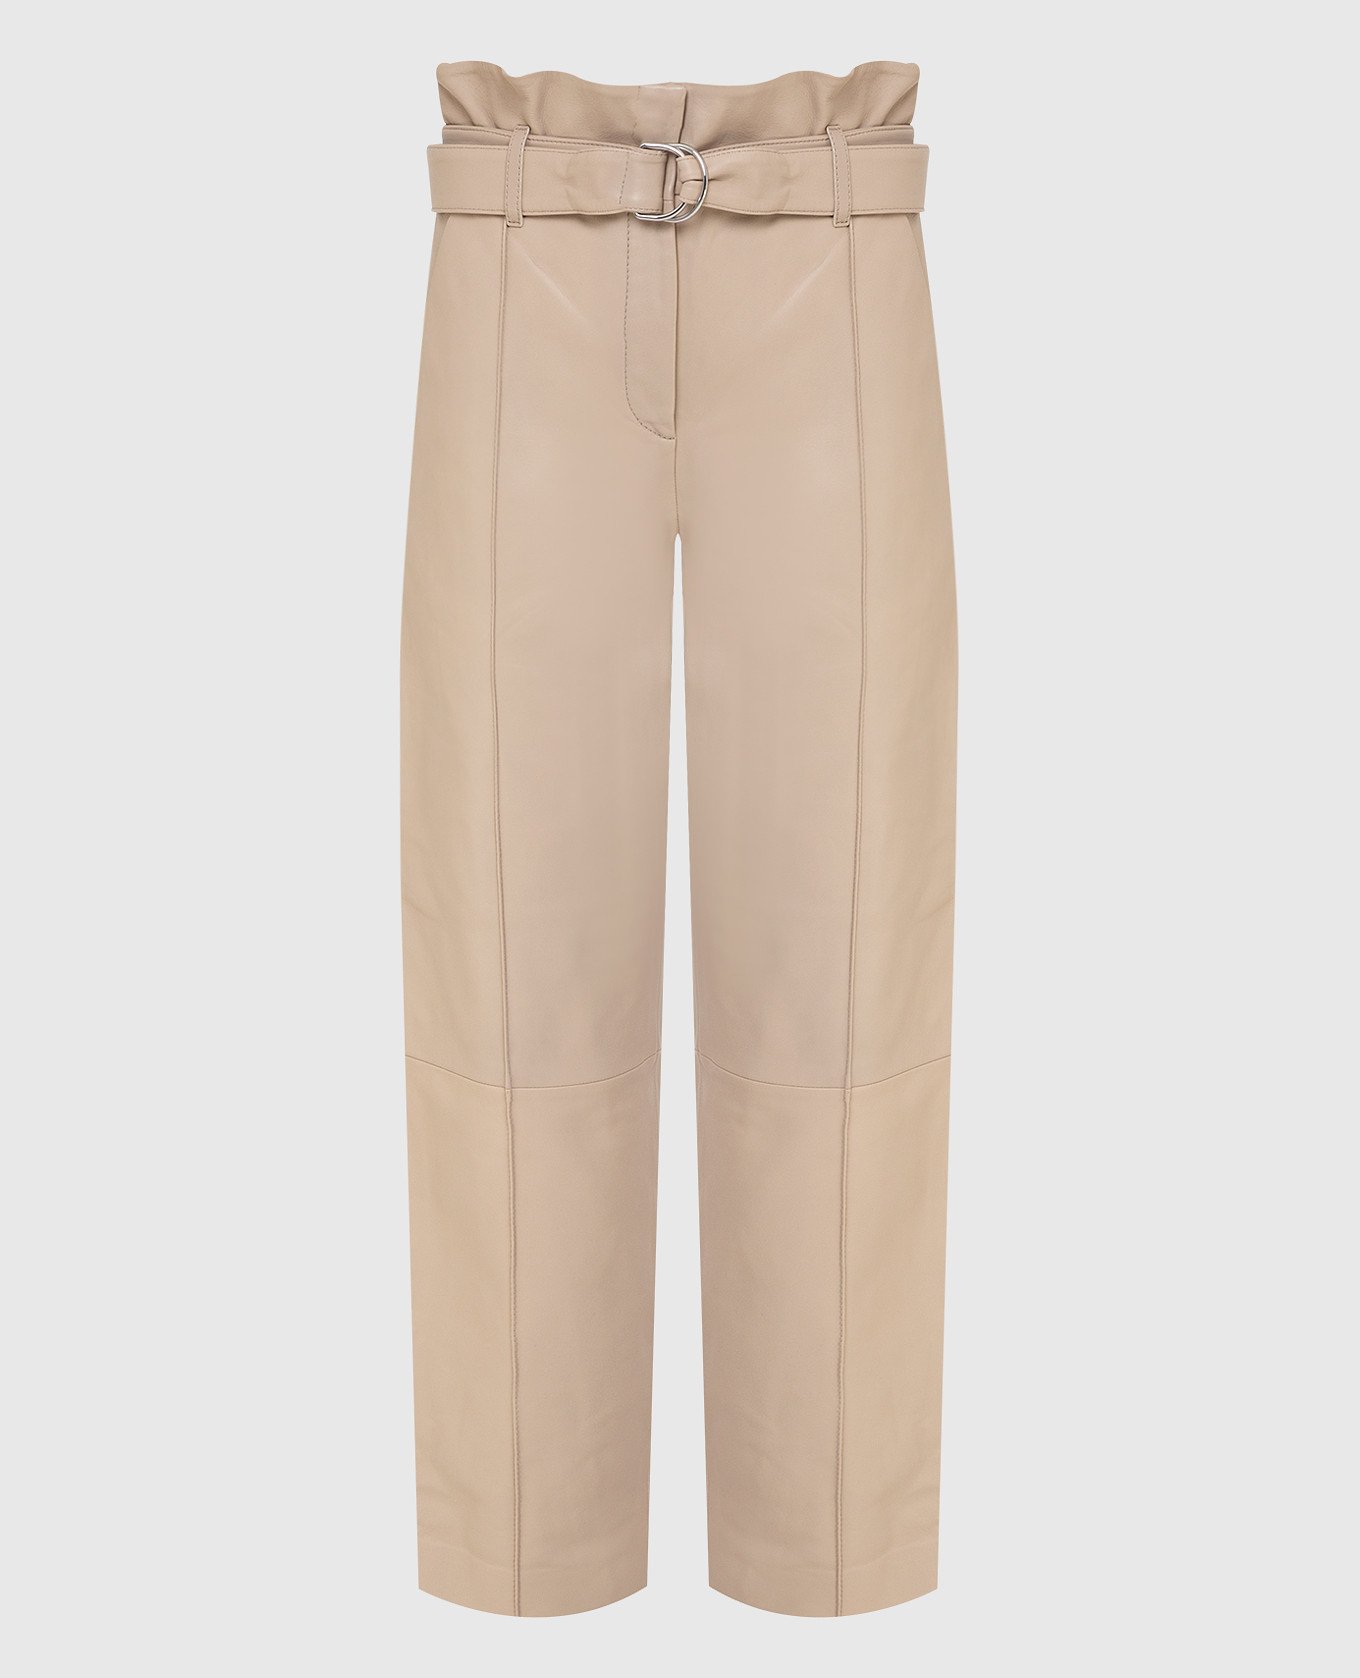 Light beige leather trousers